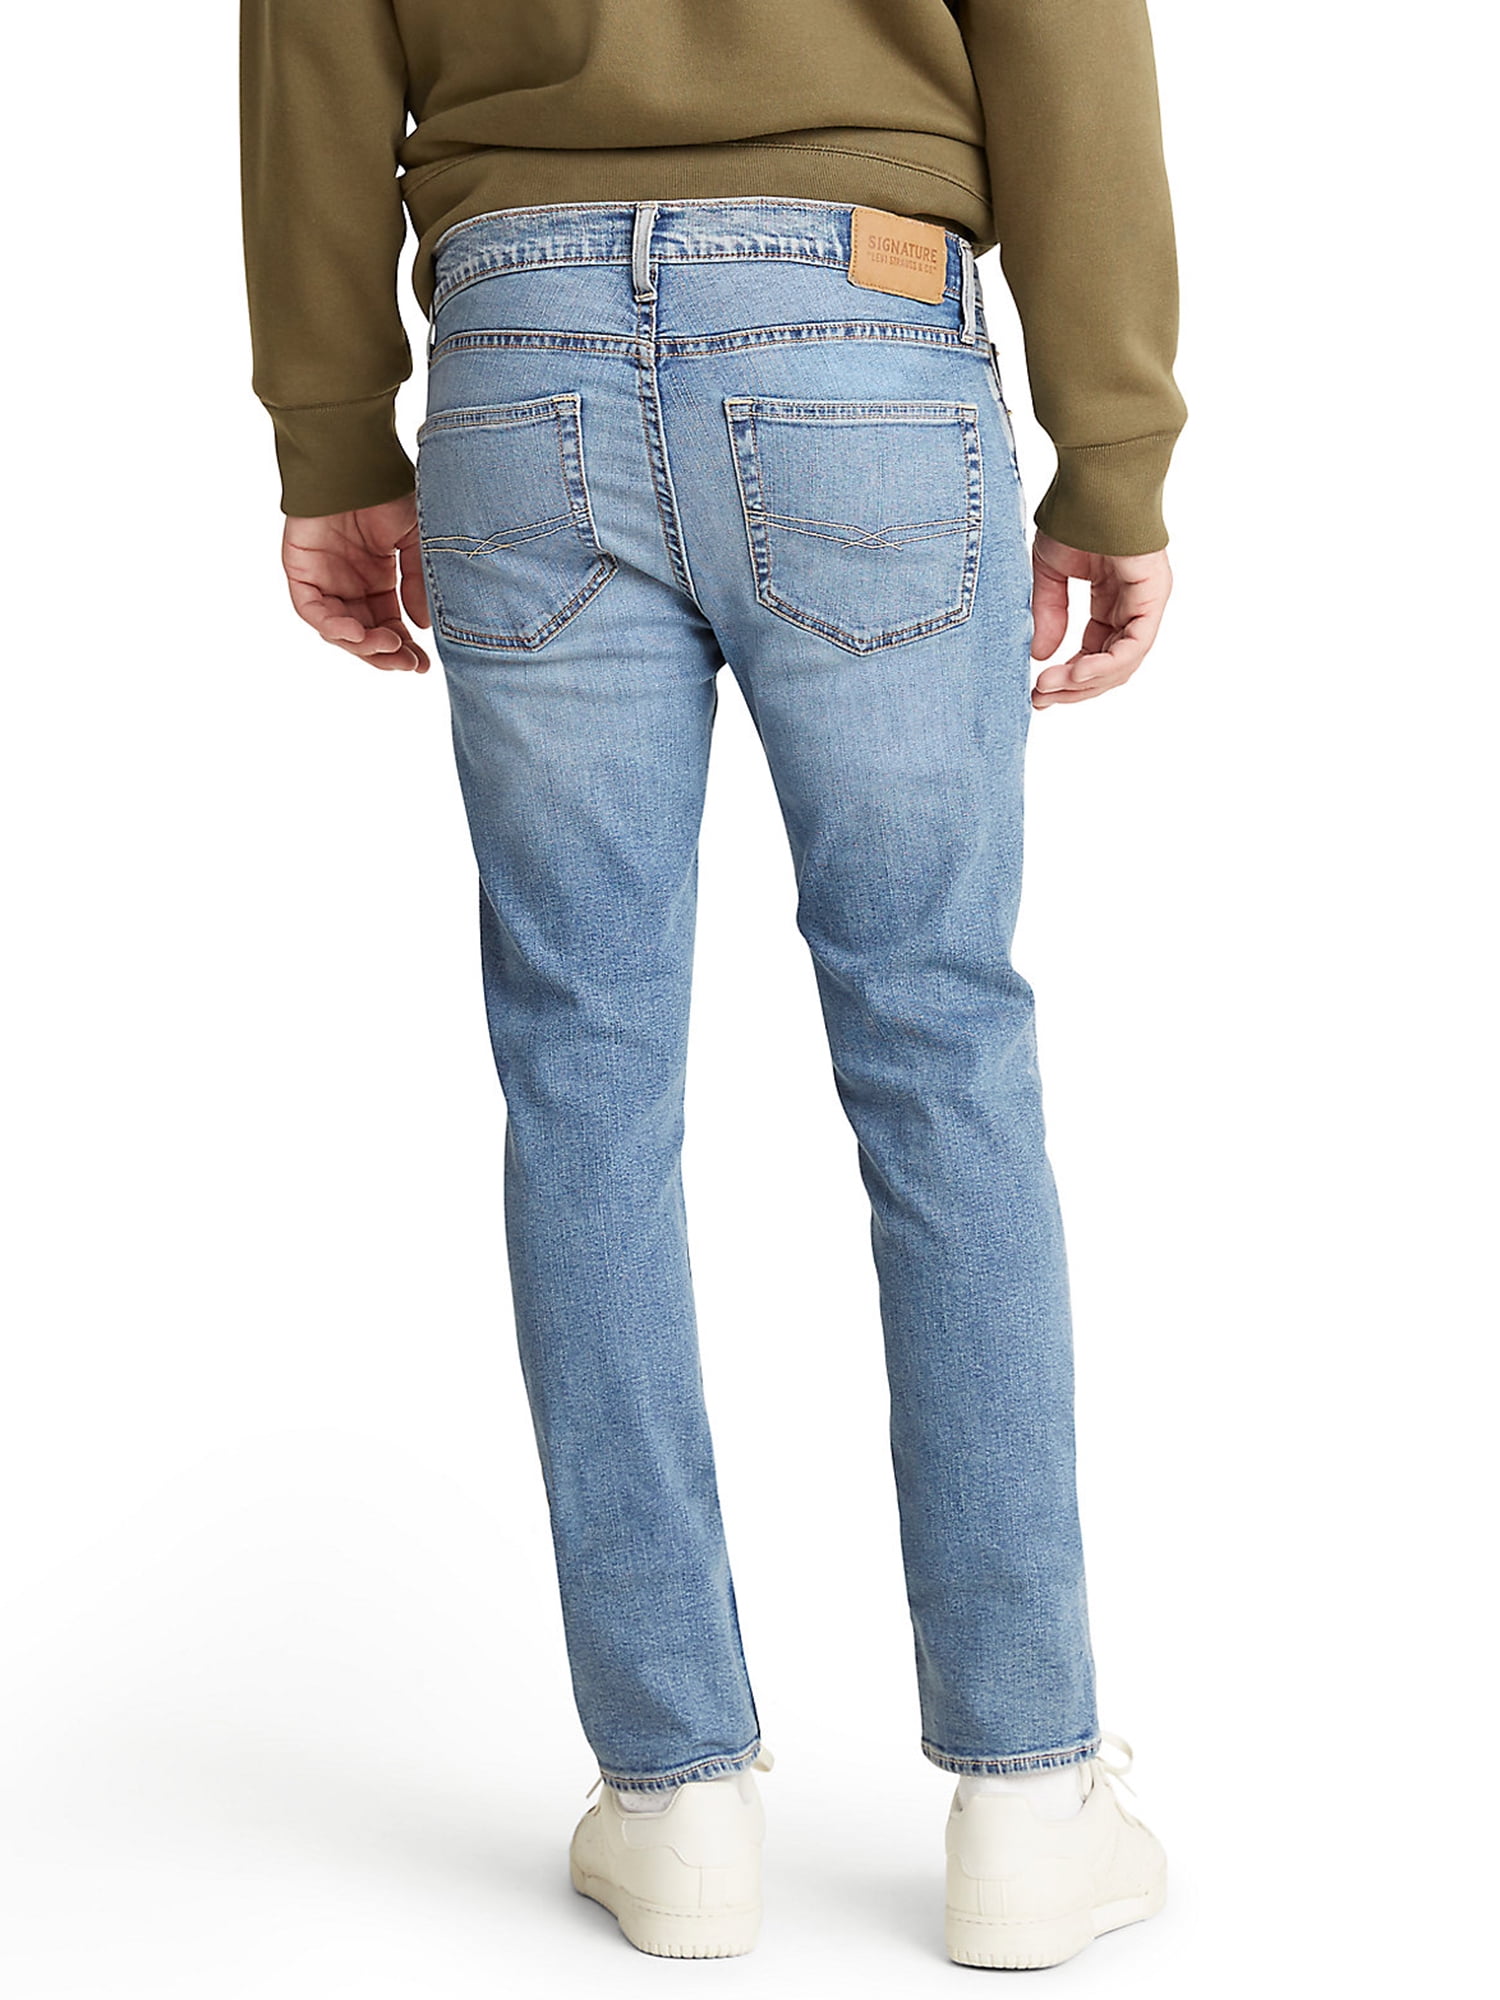 Signature by Levi Strauss & Co. Men's Skinny Fit Jeans 